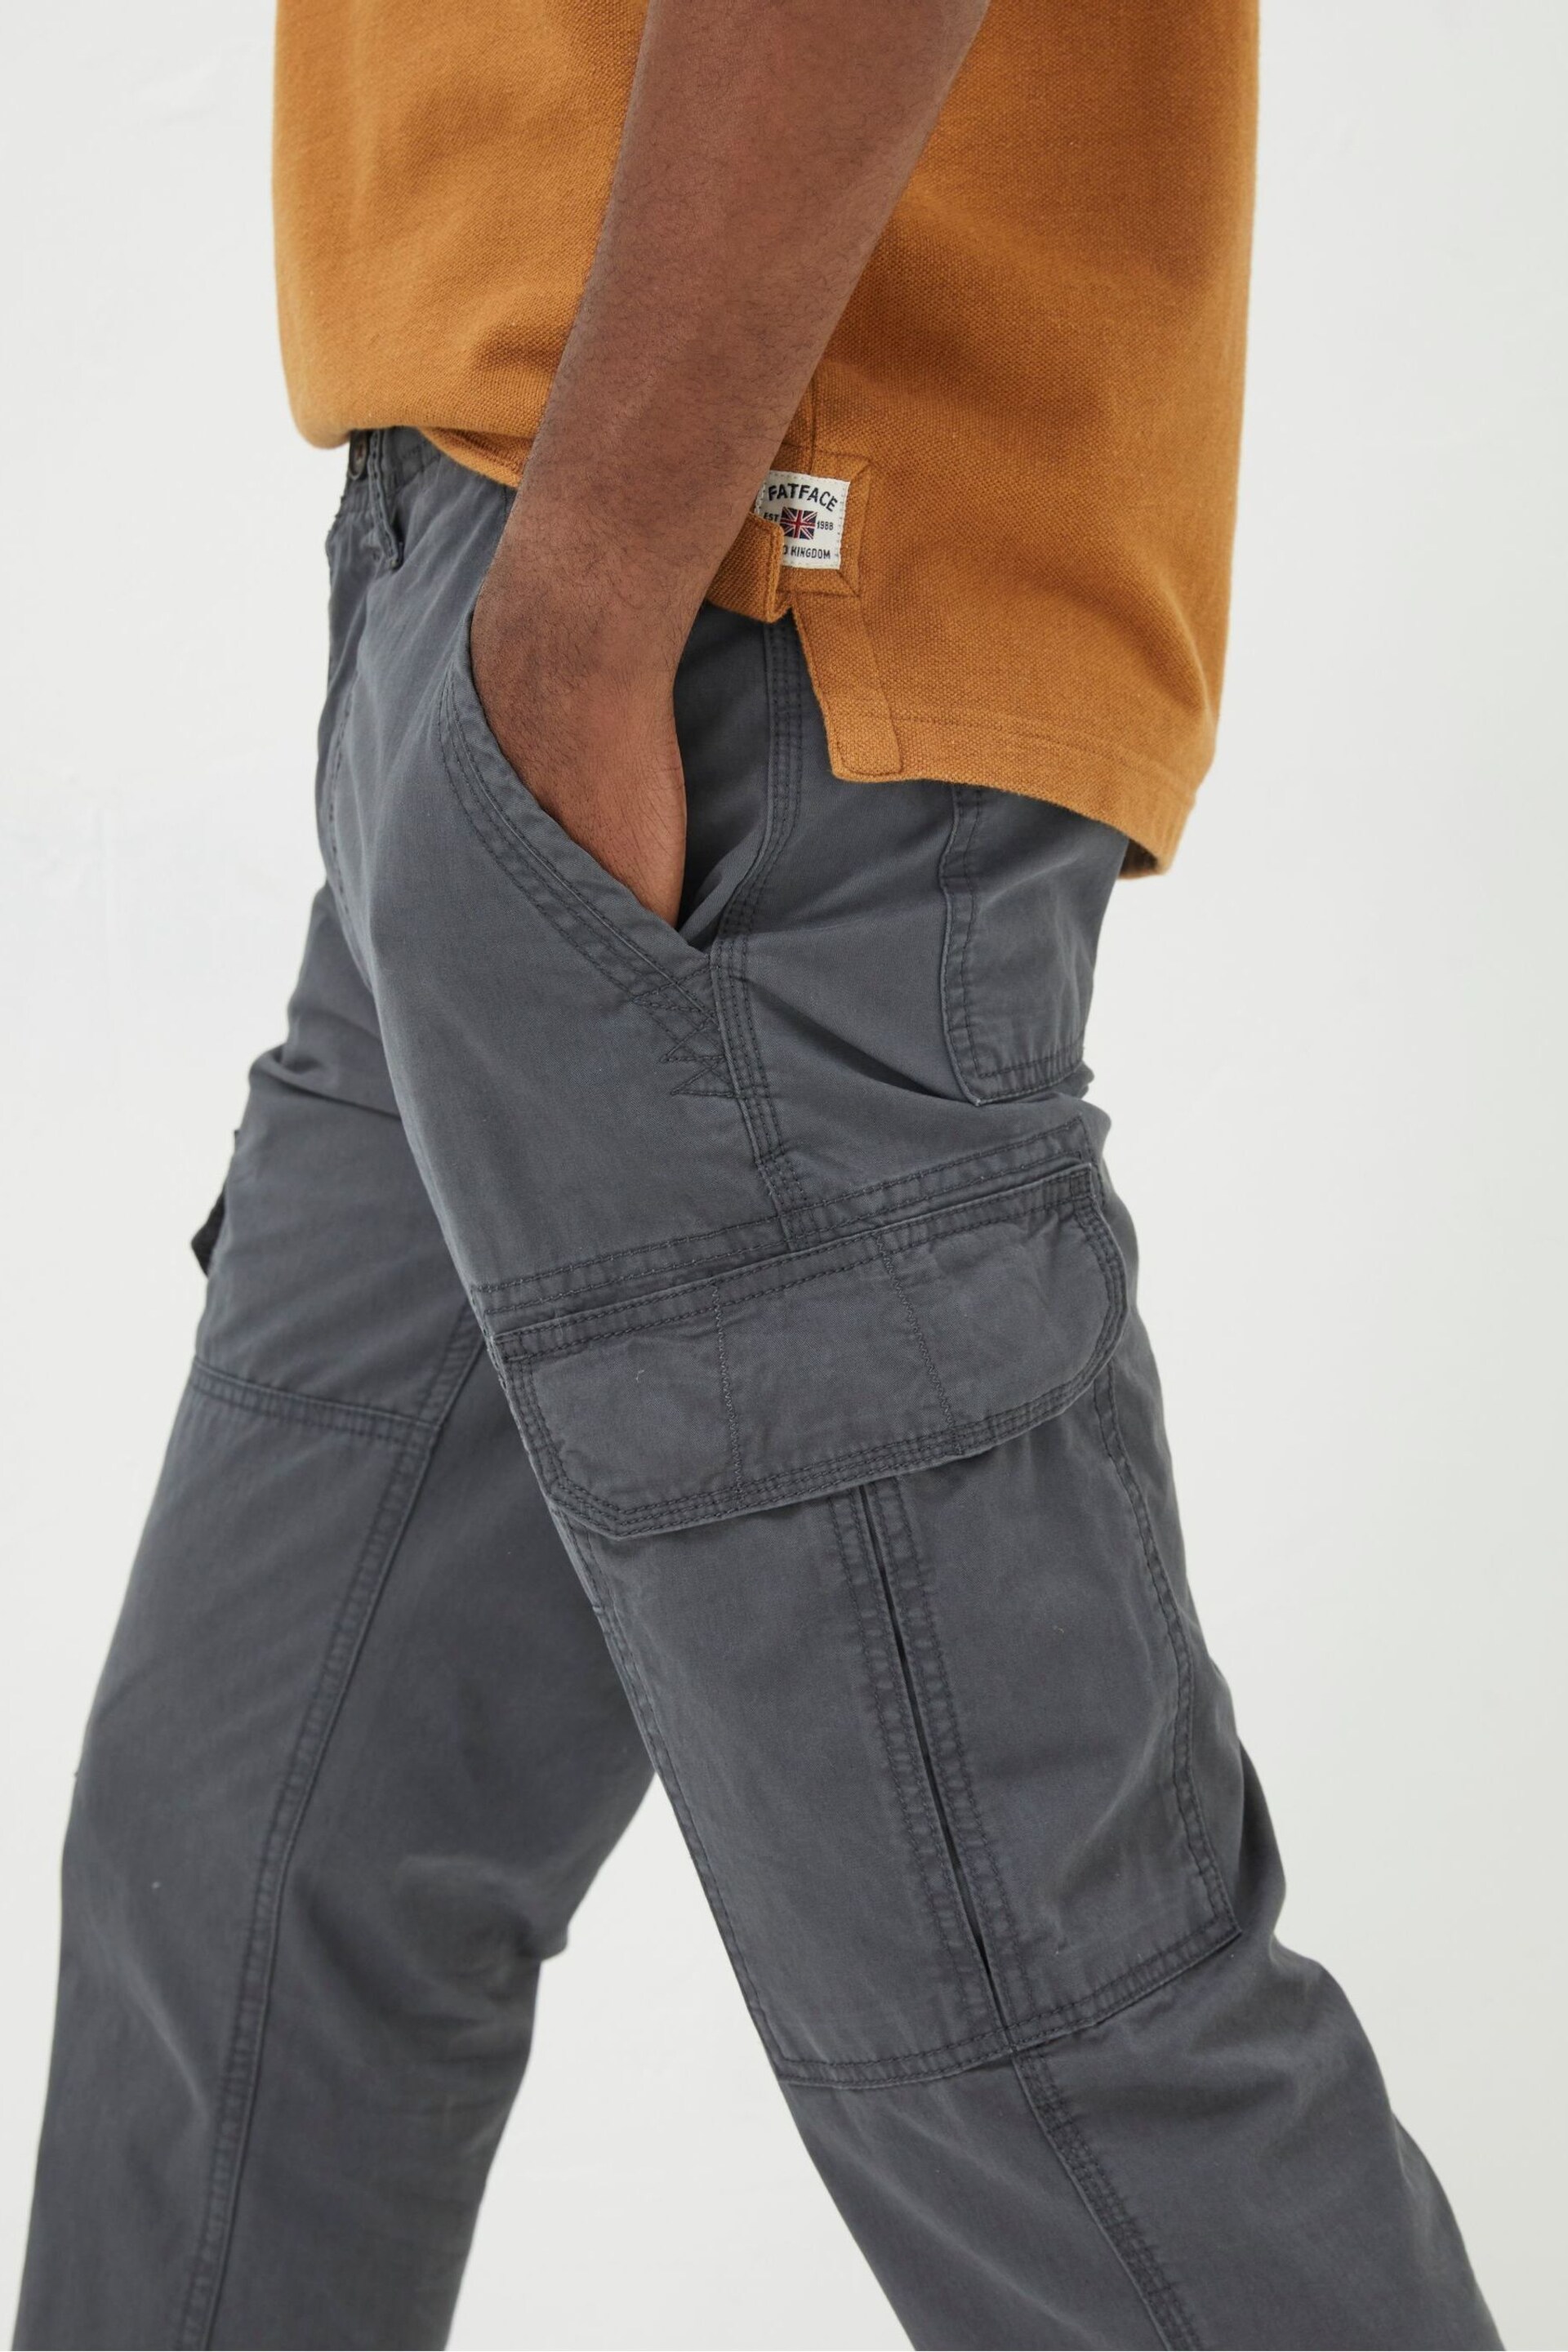 FatFace Grey Ripstop Cargo Trousers - Image 4 of 5